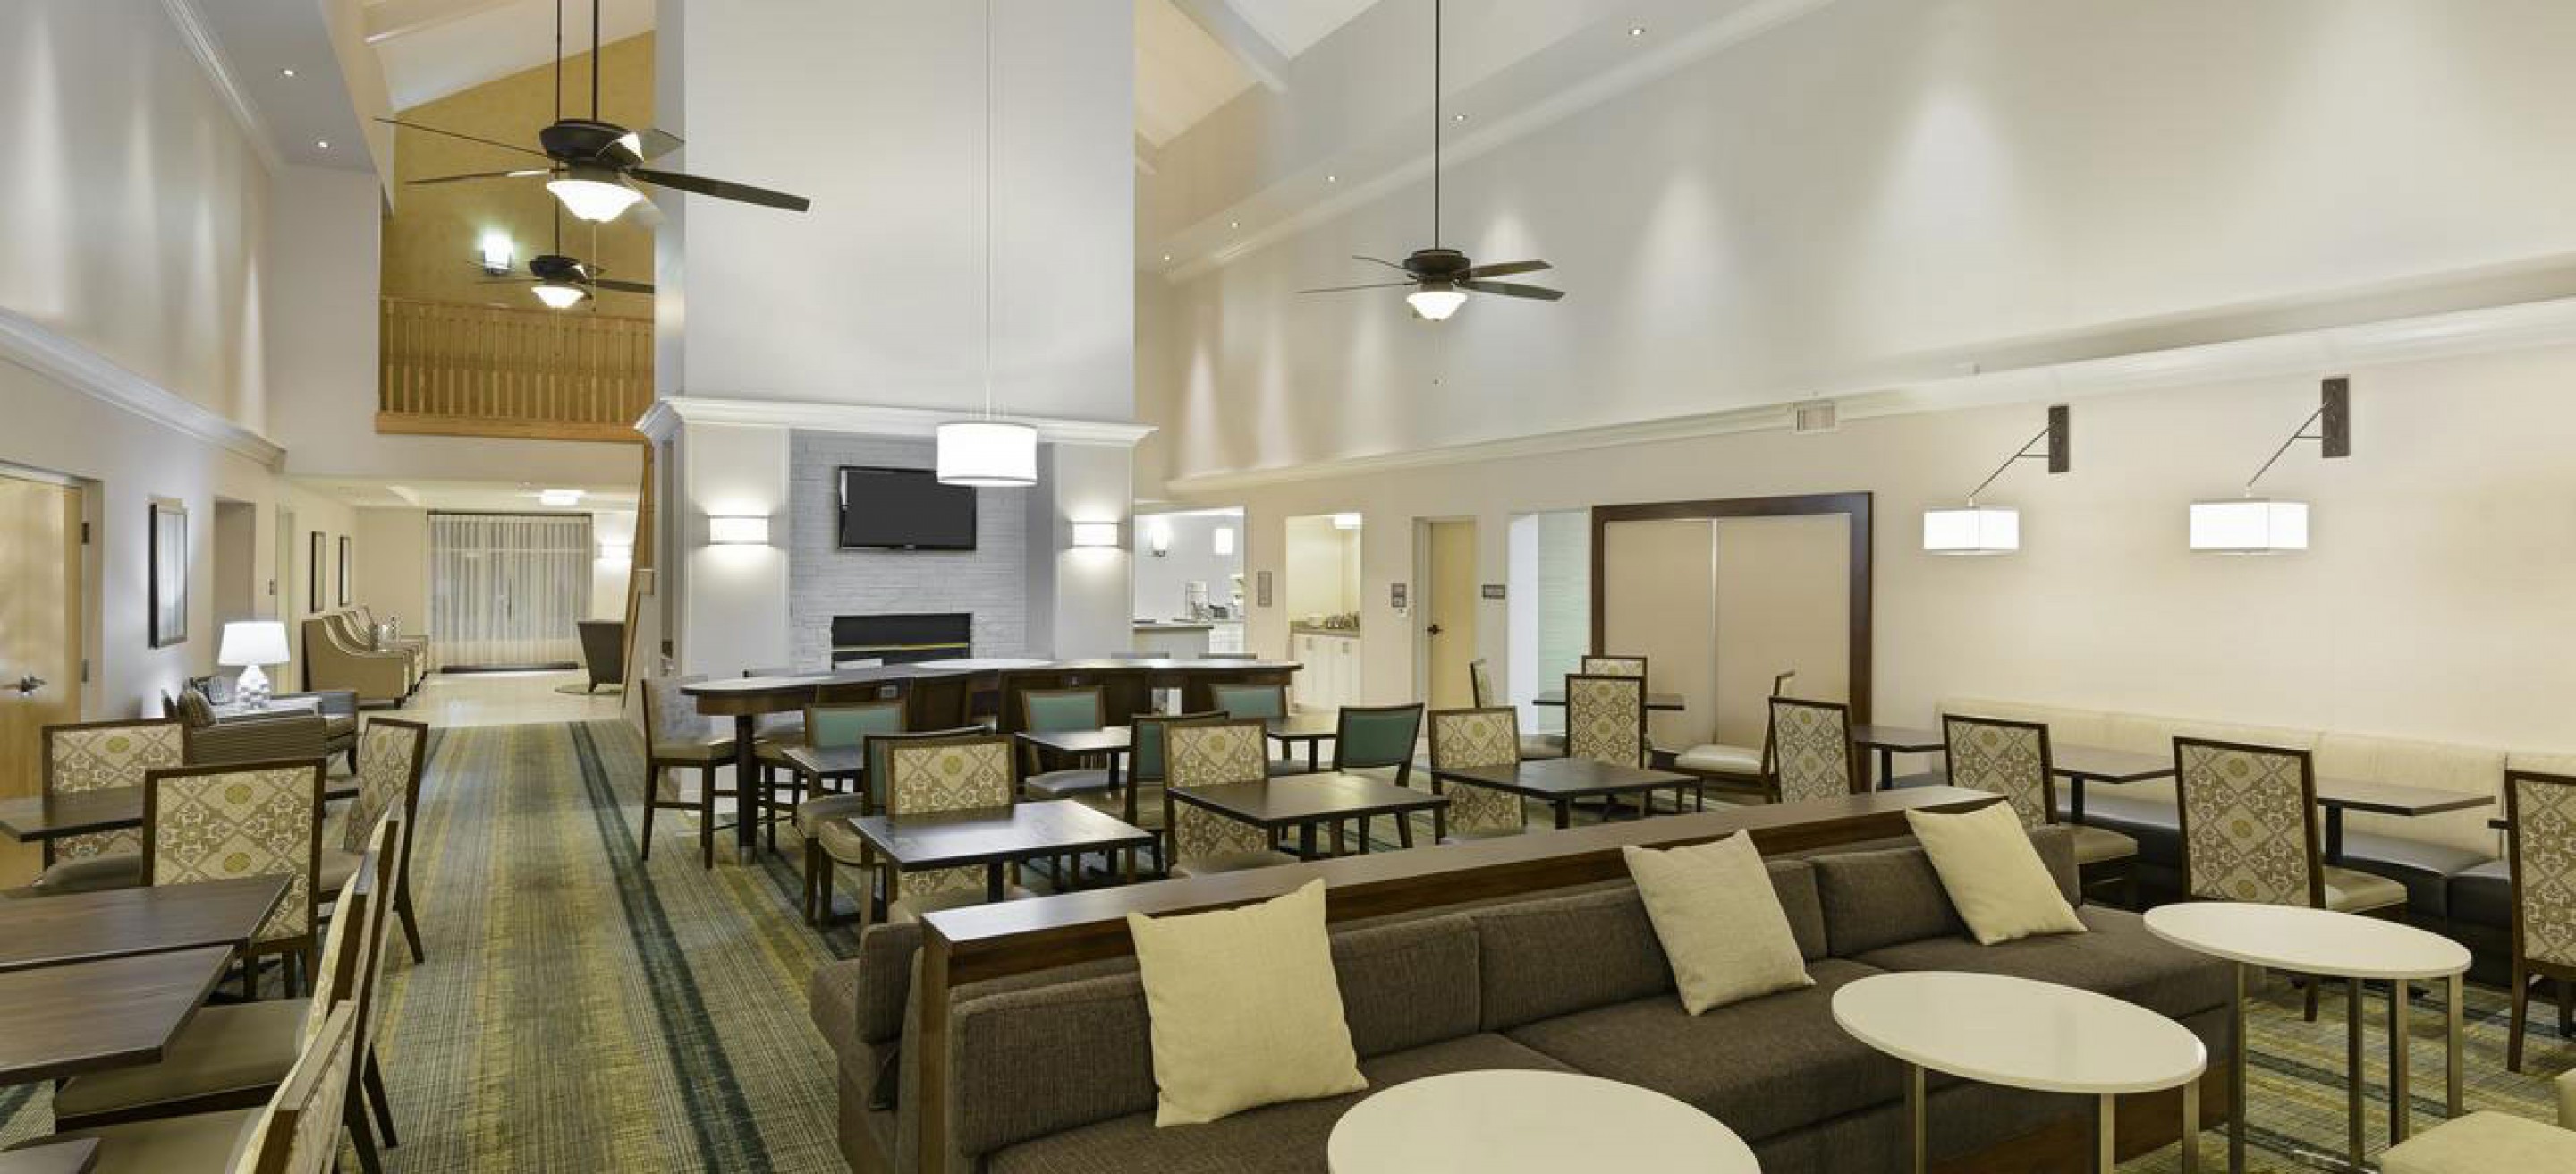 The Gettys One team implemented Hiltons Take Flight initiative for the Homewood Suites in the Phoenix-Metro Center Hilton